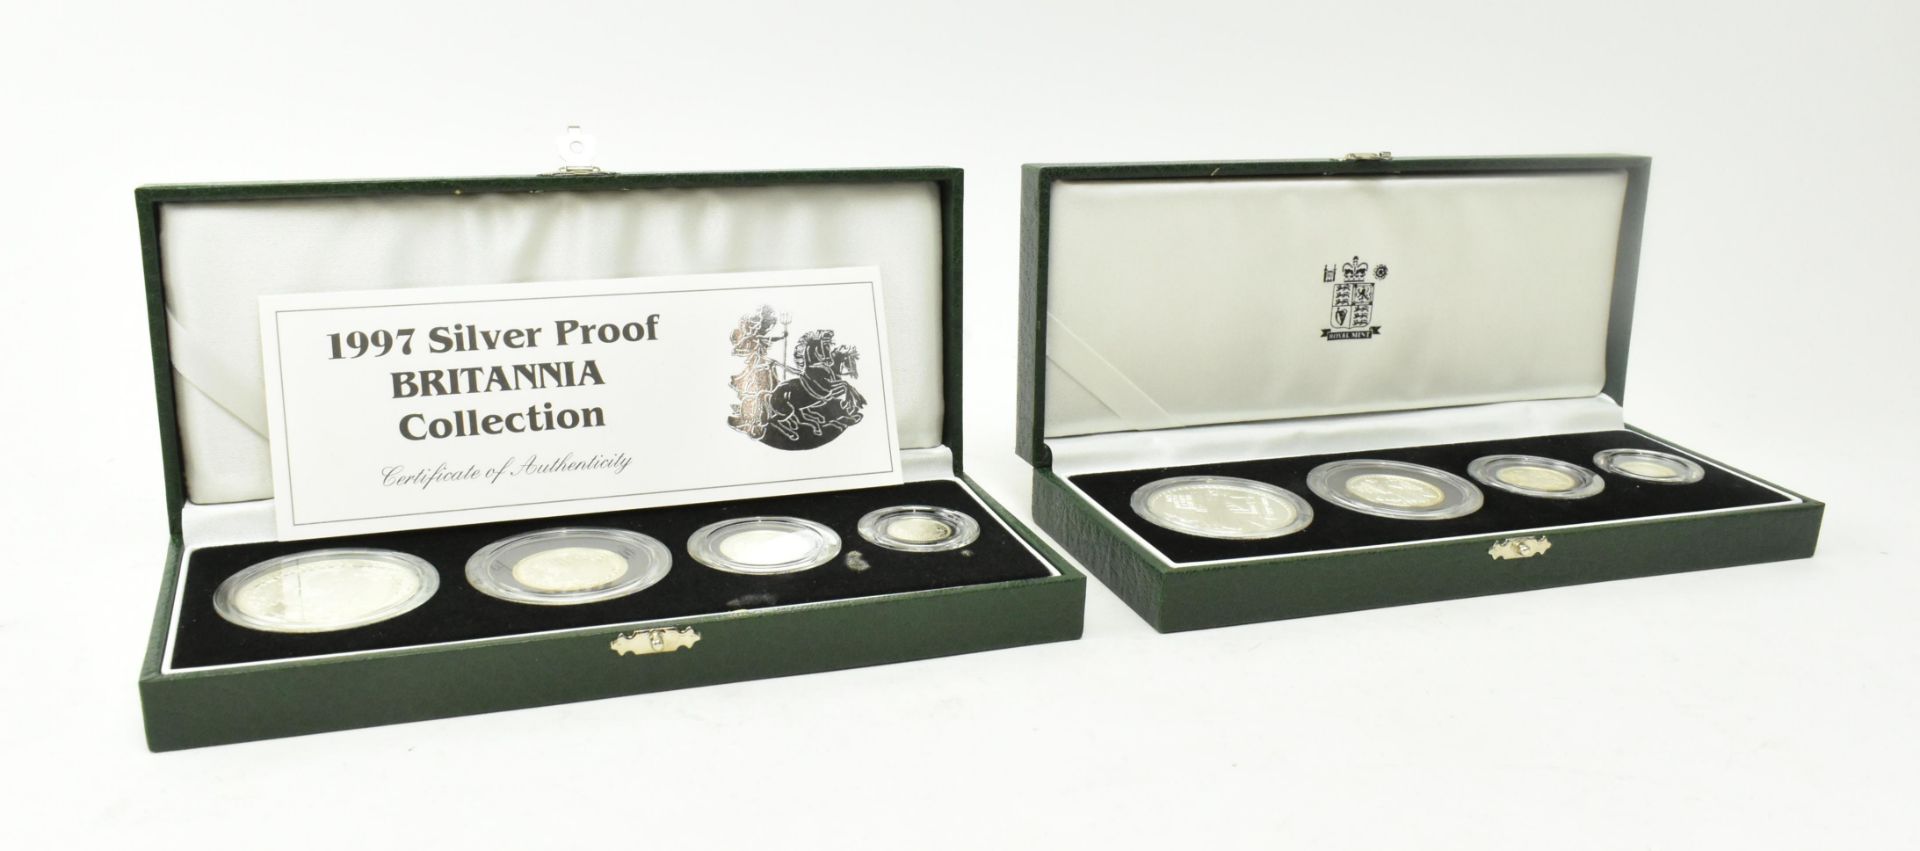 TWO SILVER PROOF BRITANNIA COIN COLLECTIONS, 1997 & 2001